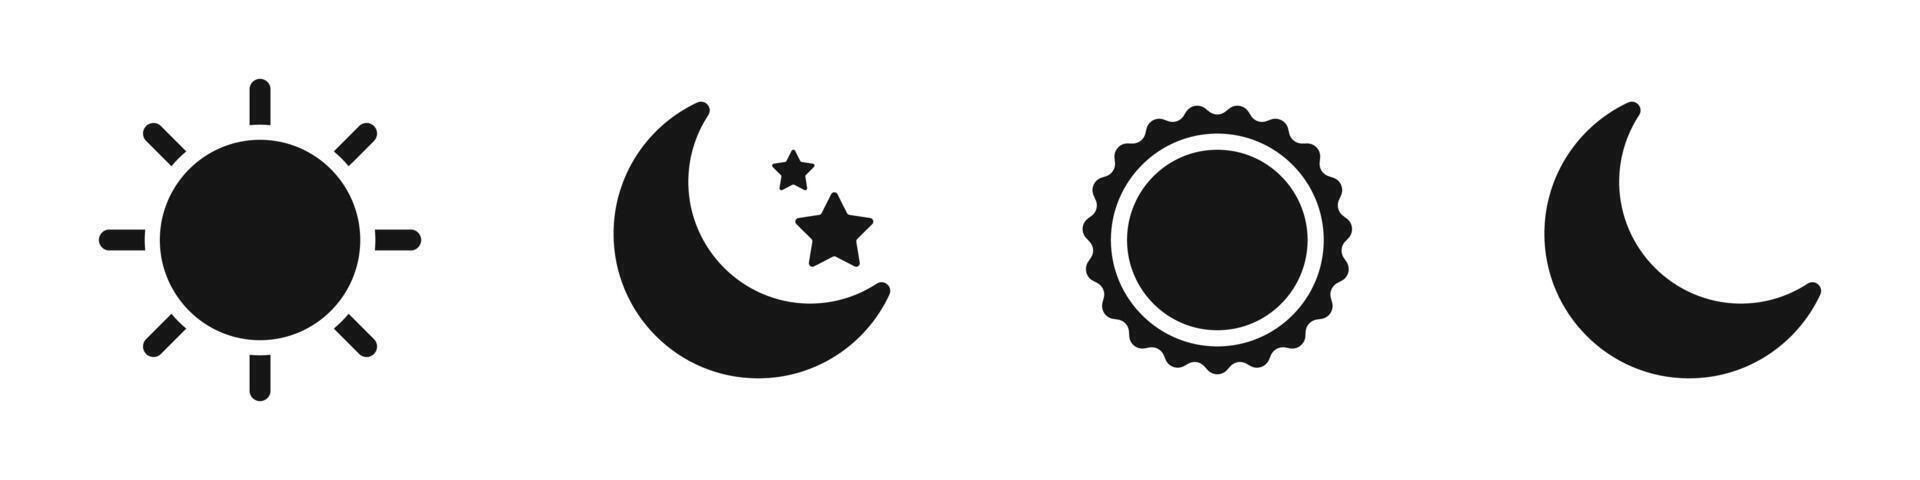 Day and night mode icons. Sun and moon icons. day nightsymbols. Sun and moon silhouettes vector